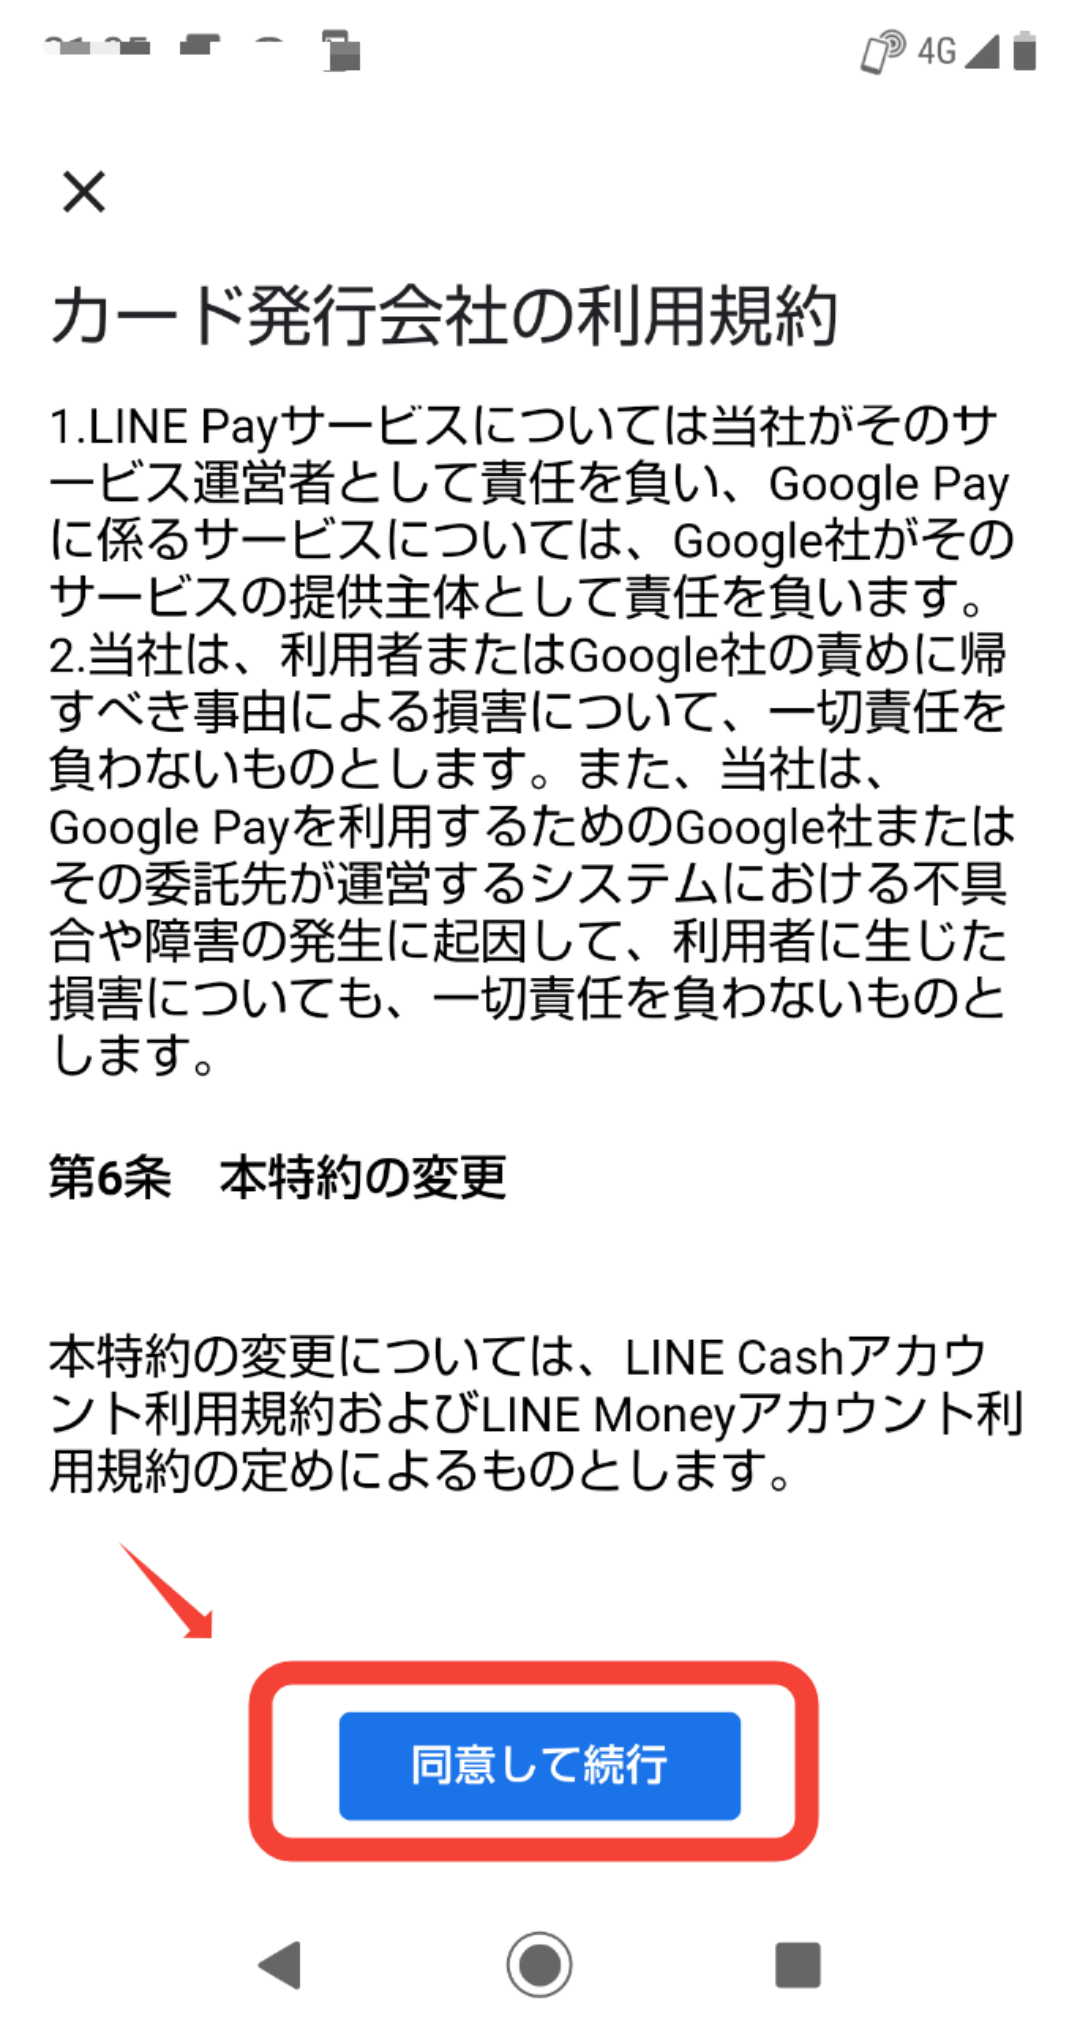 Android端QUICKpay登録6